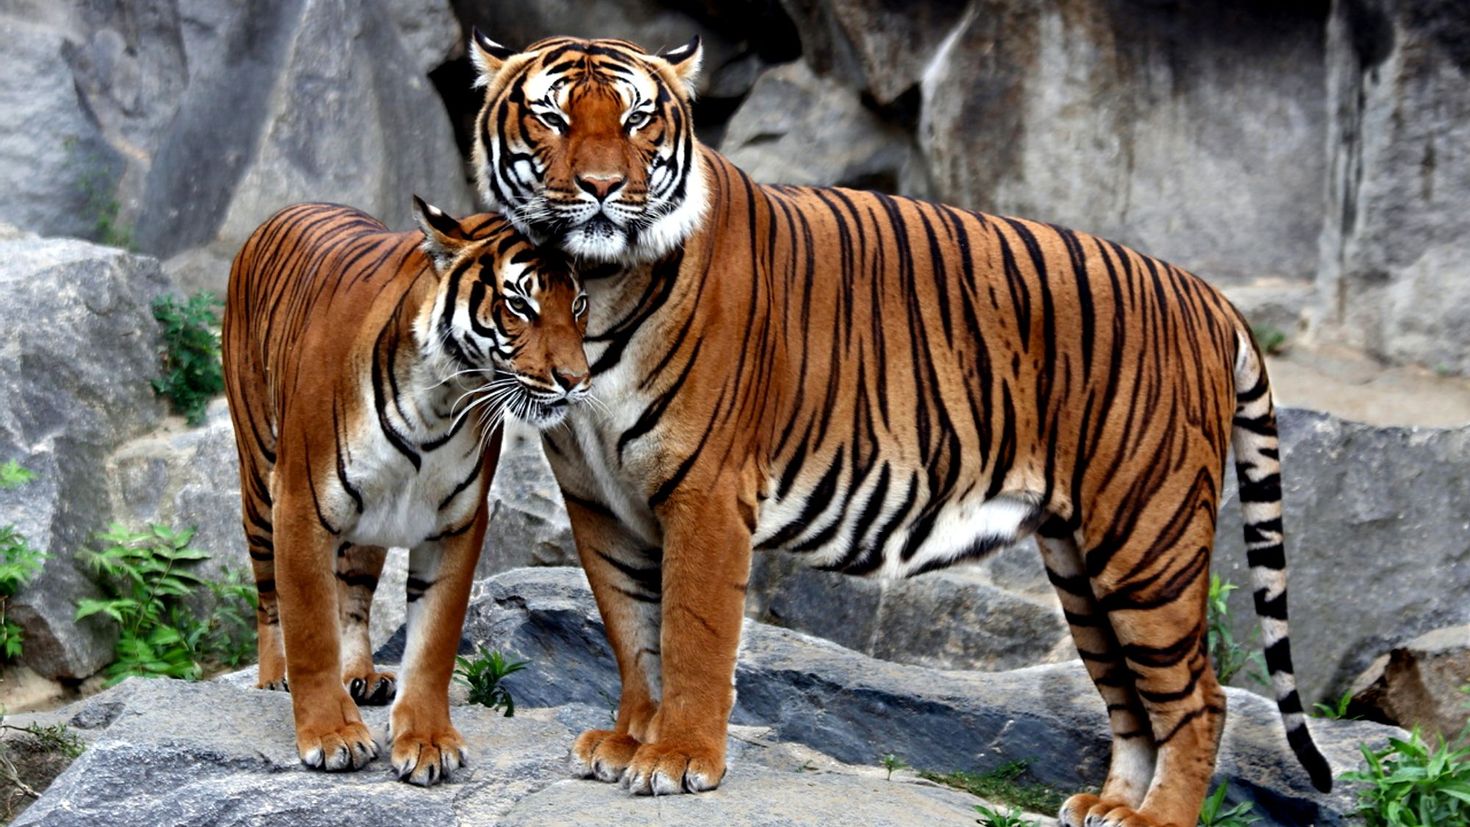 There are black and white tigers